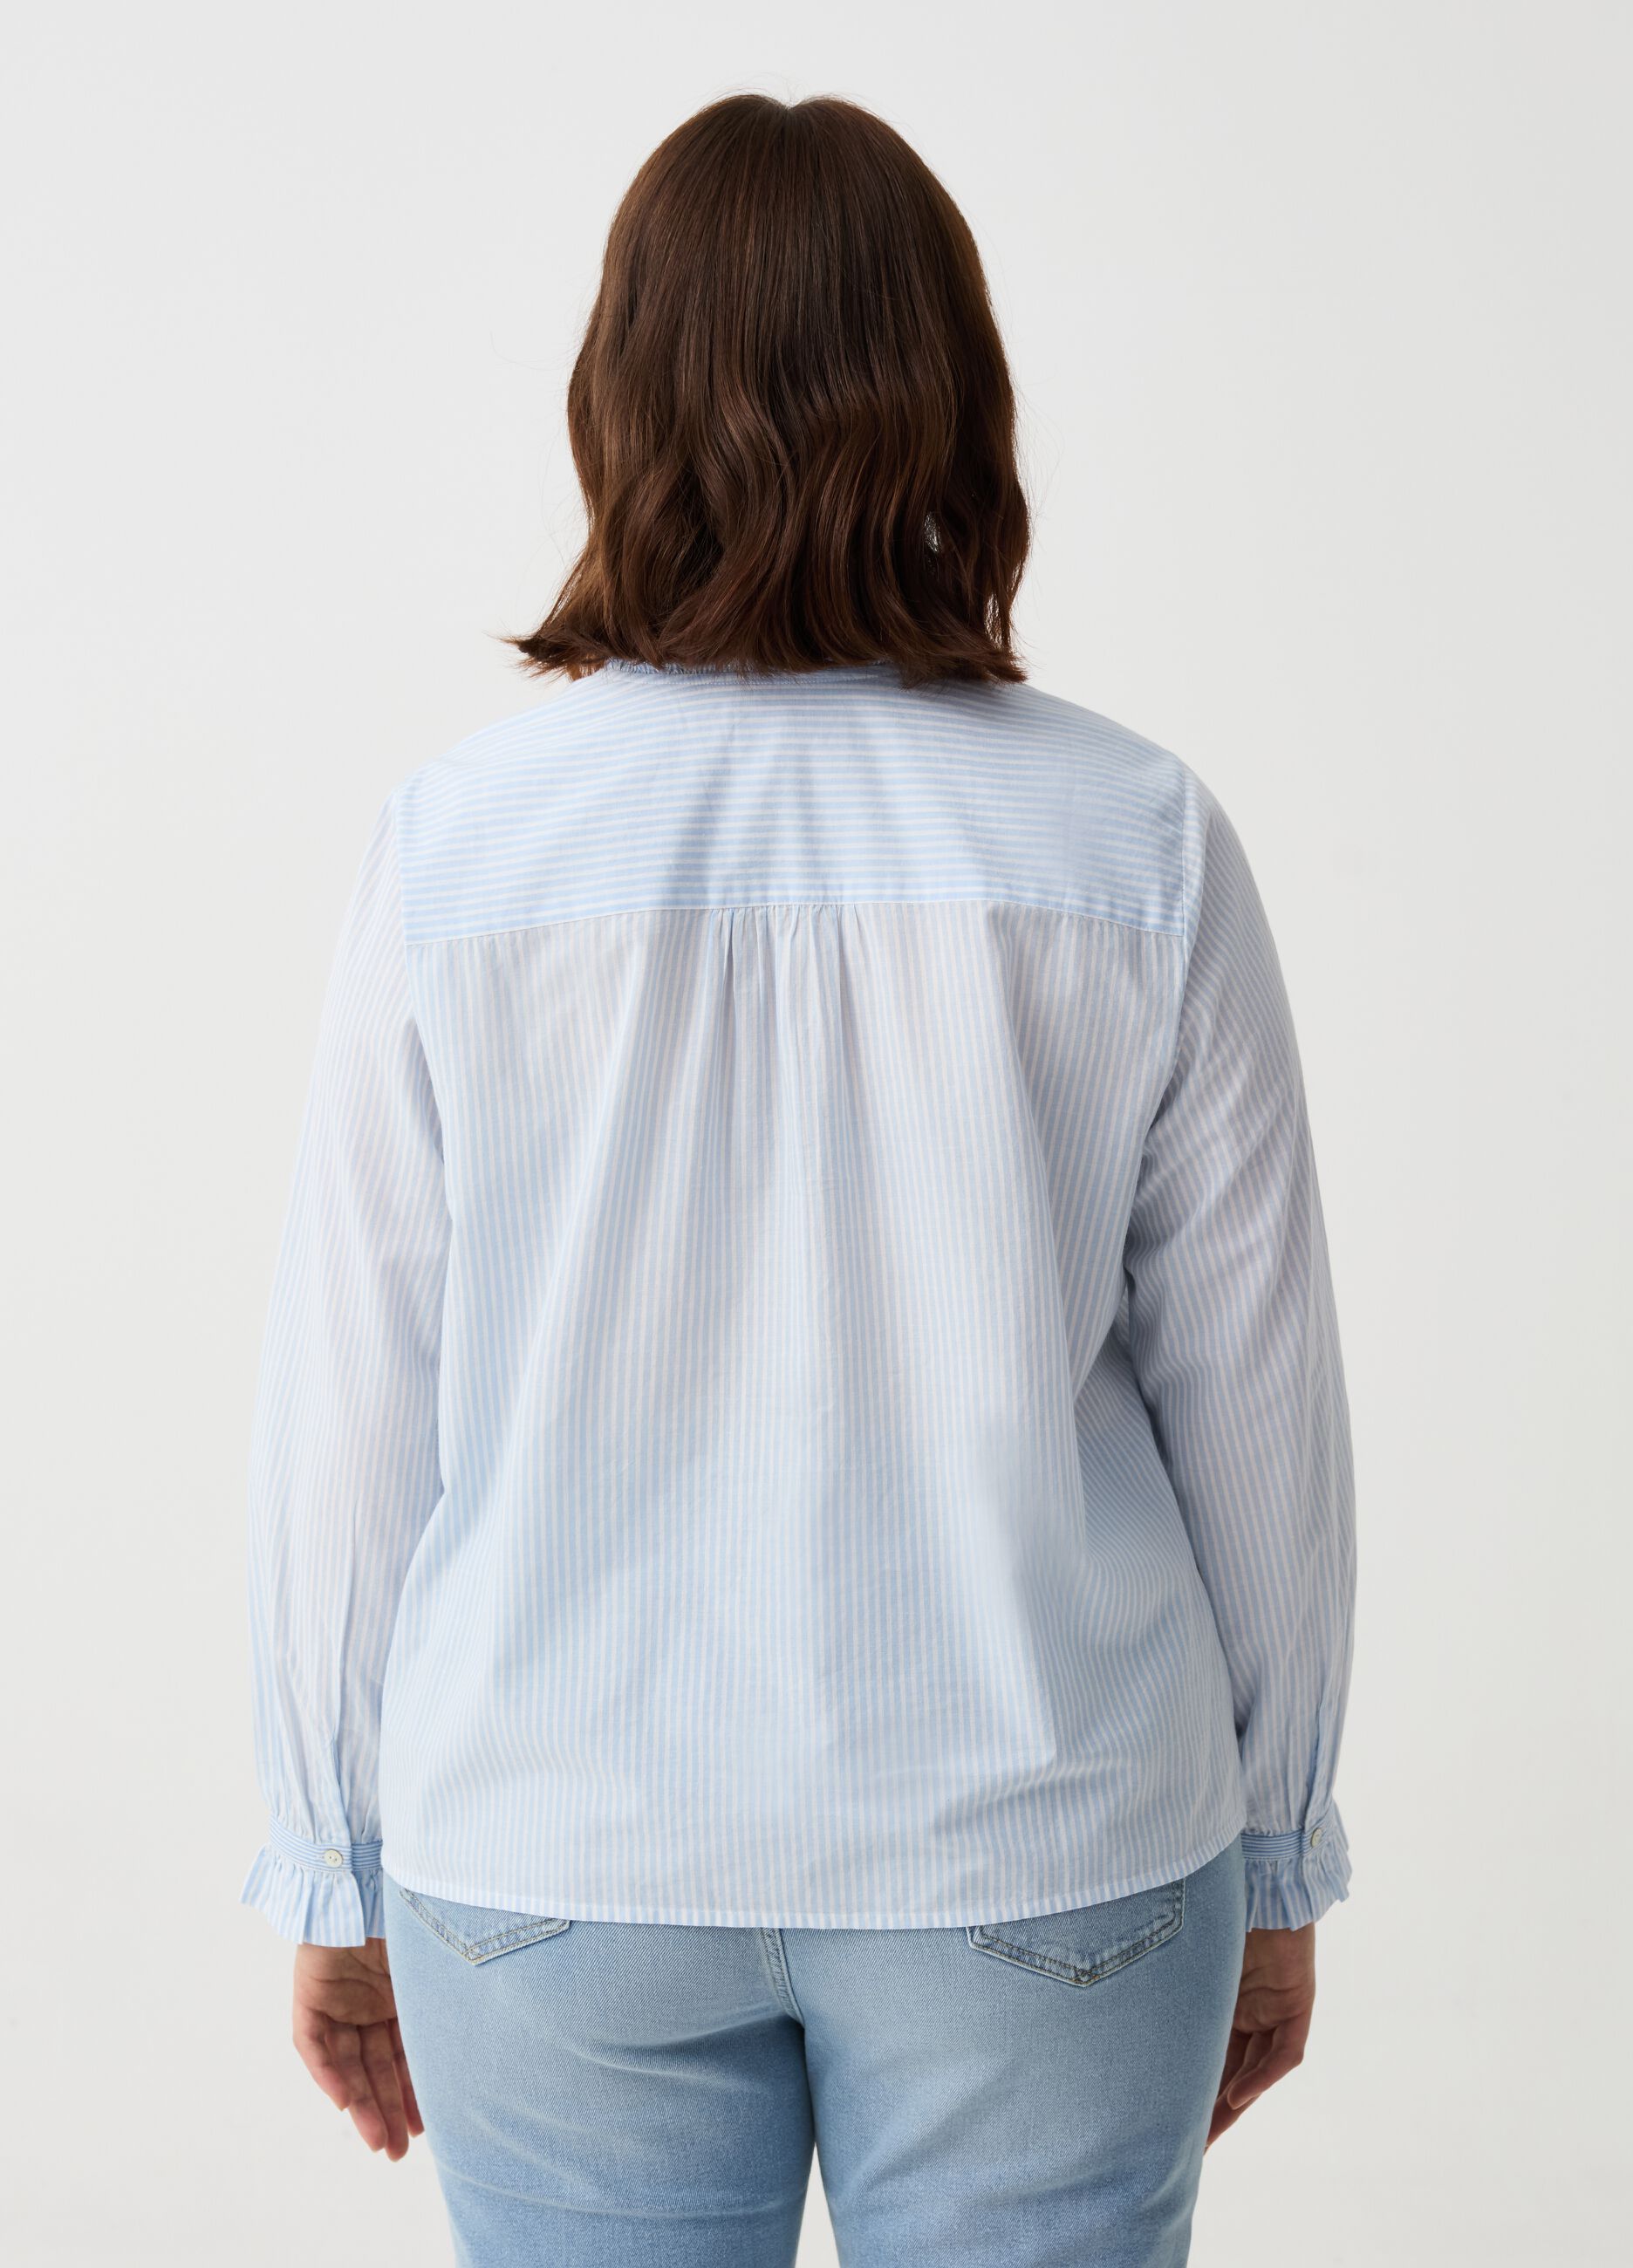 Curvy blouse with thin stripes and frills